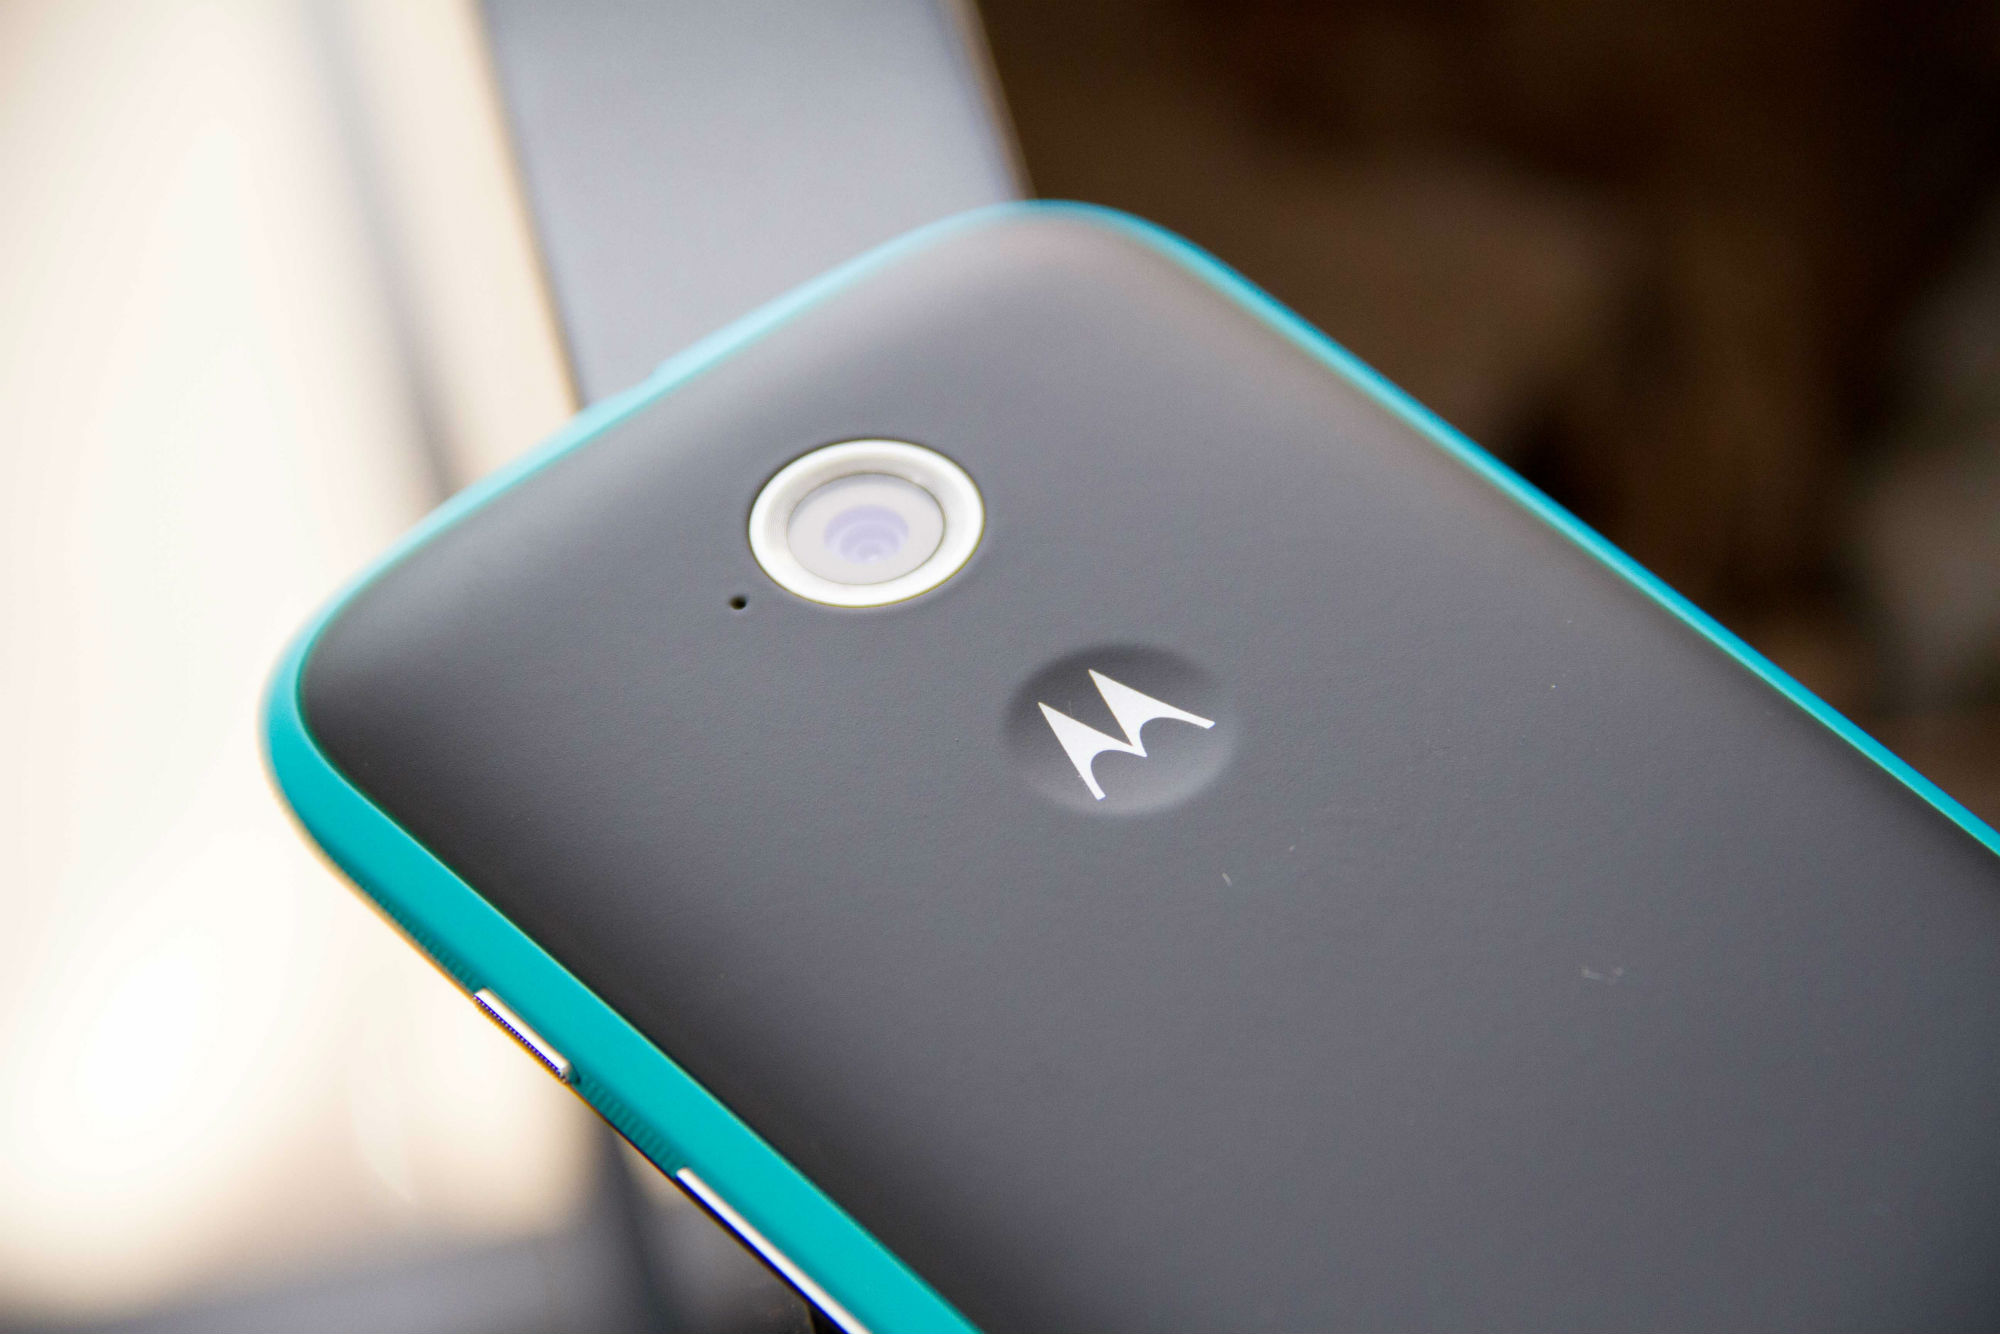 Motorola – The incredible only happens to those who share